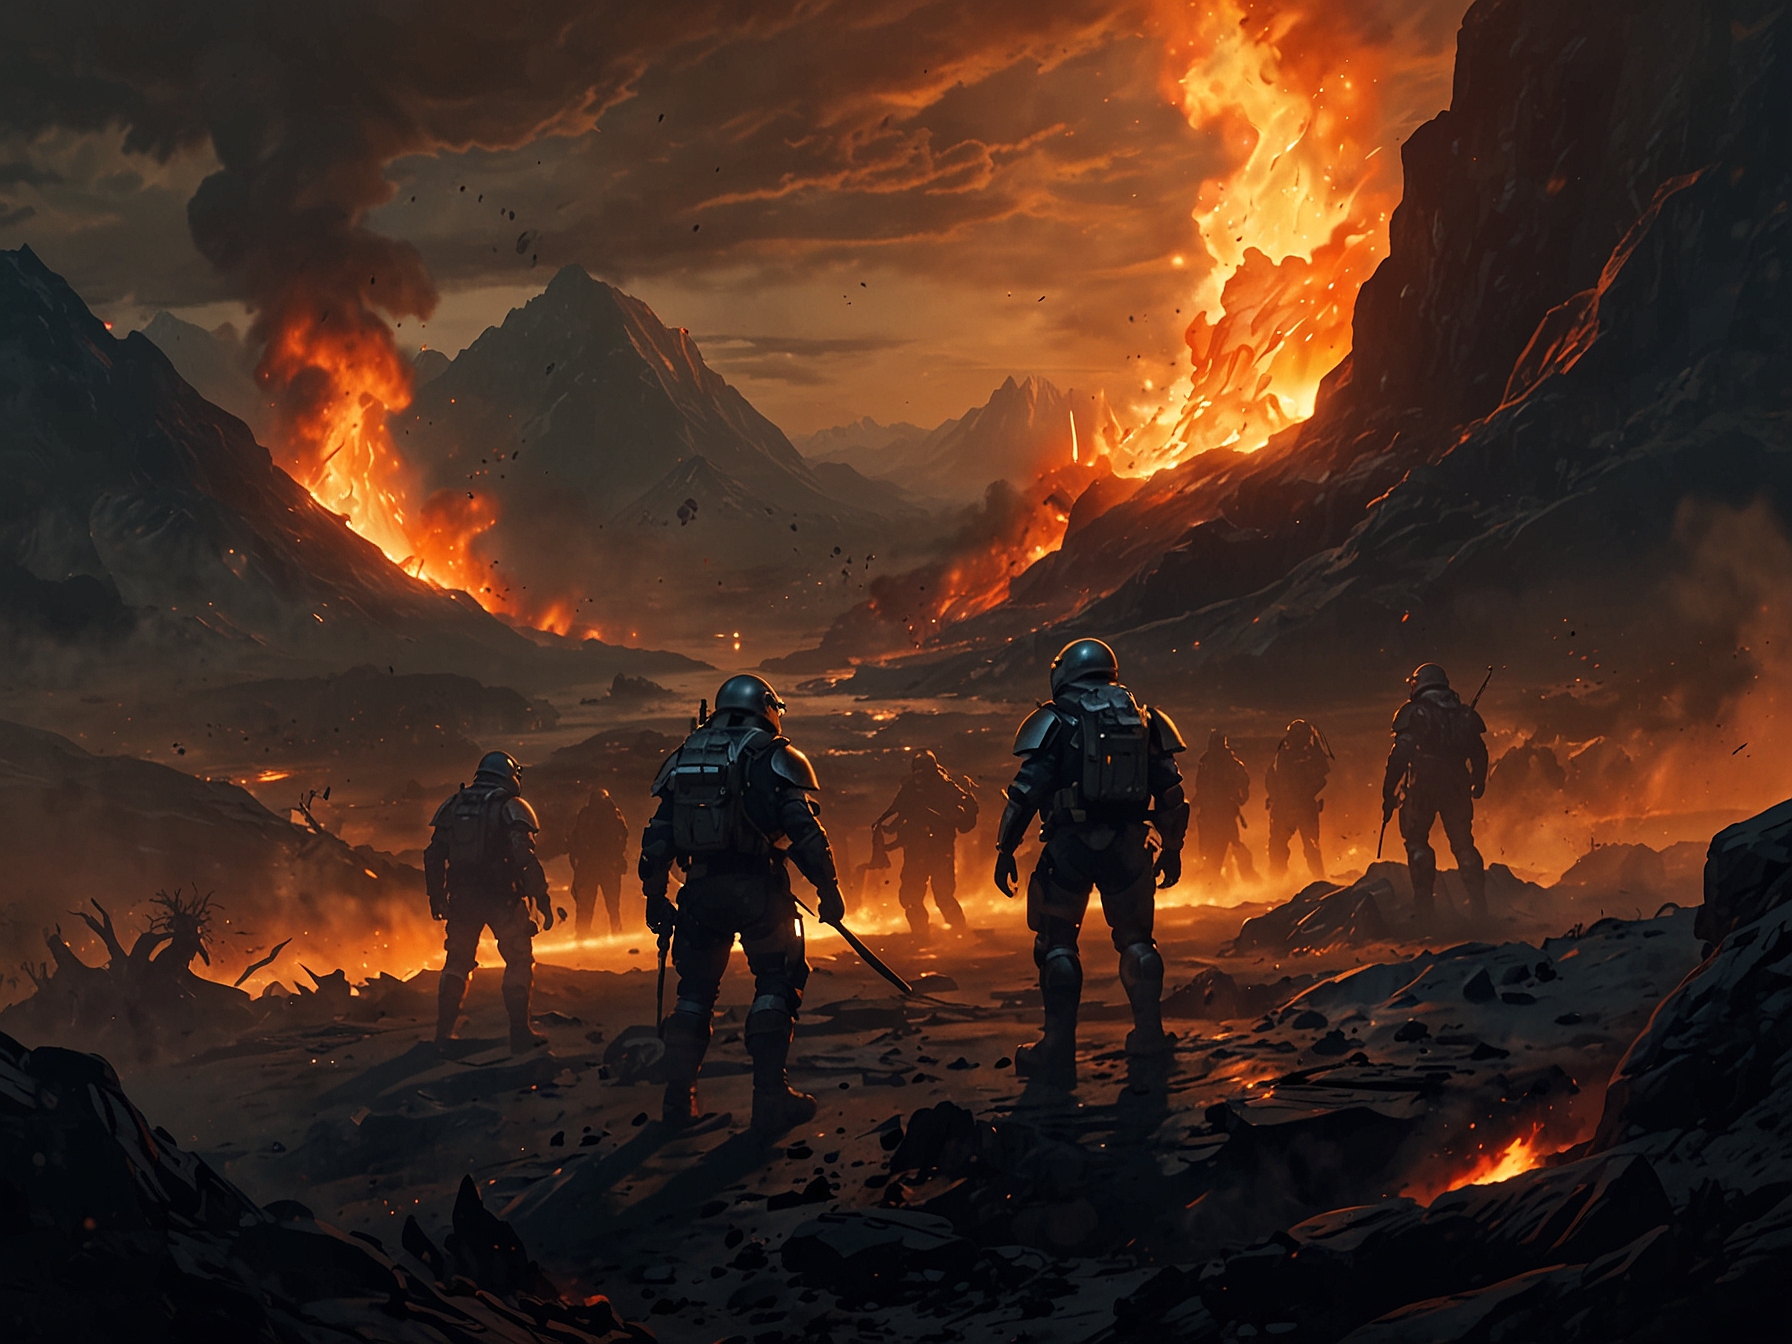 A group of players navigate the fiery landscape of Hellmire, facing rivers of molten lava and firestorms, showcasing the intense, cooperative gameplay of Helldivers 2.